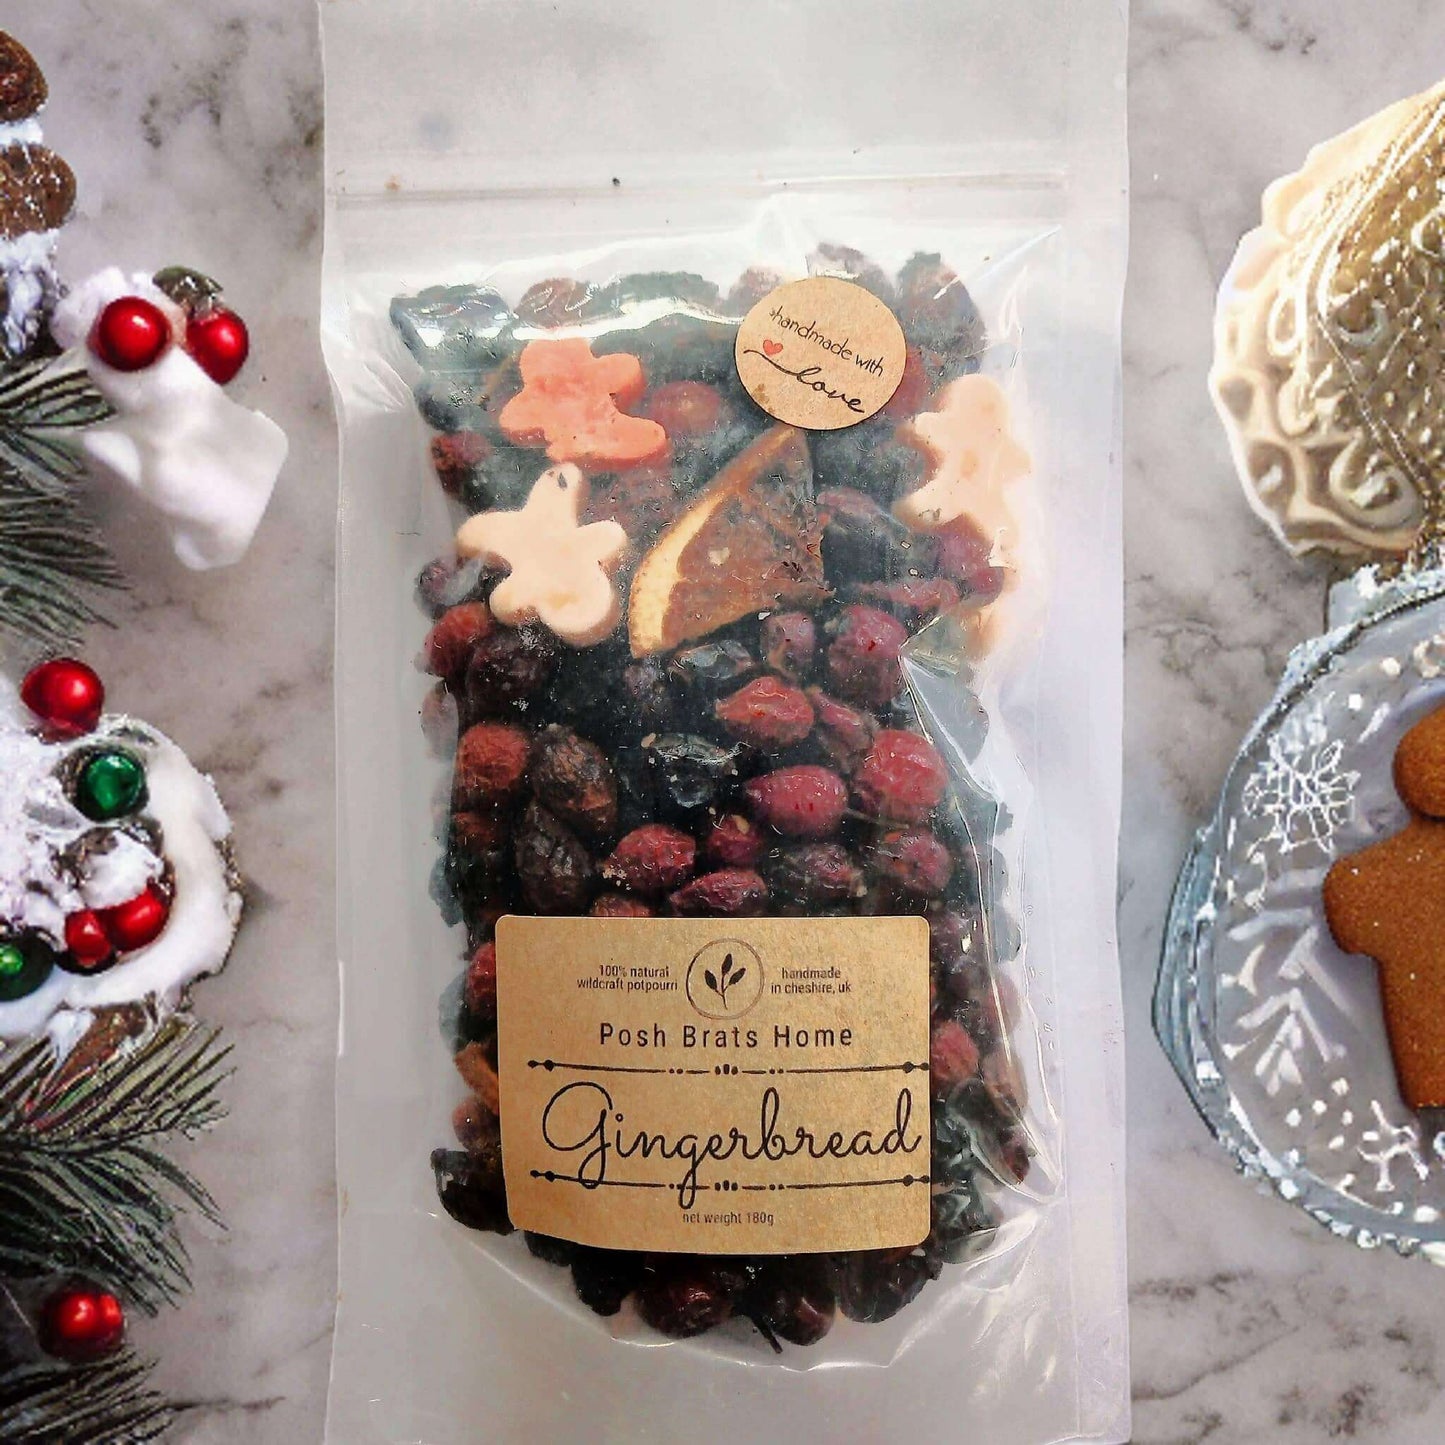 Experience the intoxicating smell of Gingerbread with our Natural Wildcraft Potpourri. Let your home be a haven!